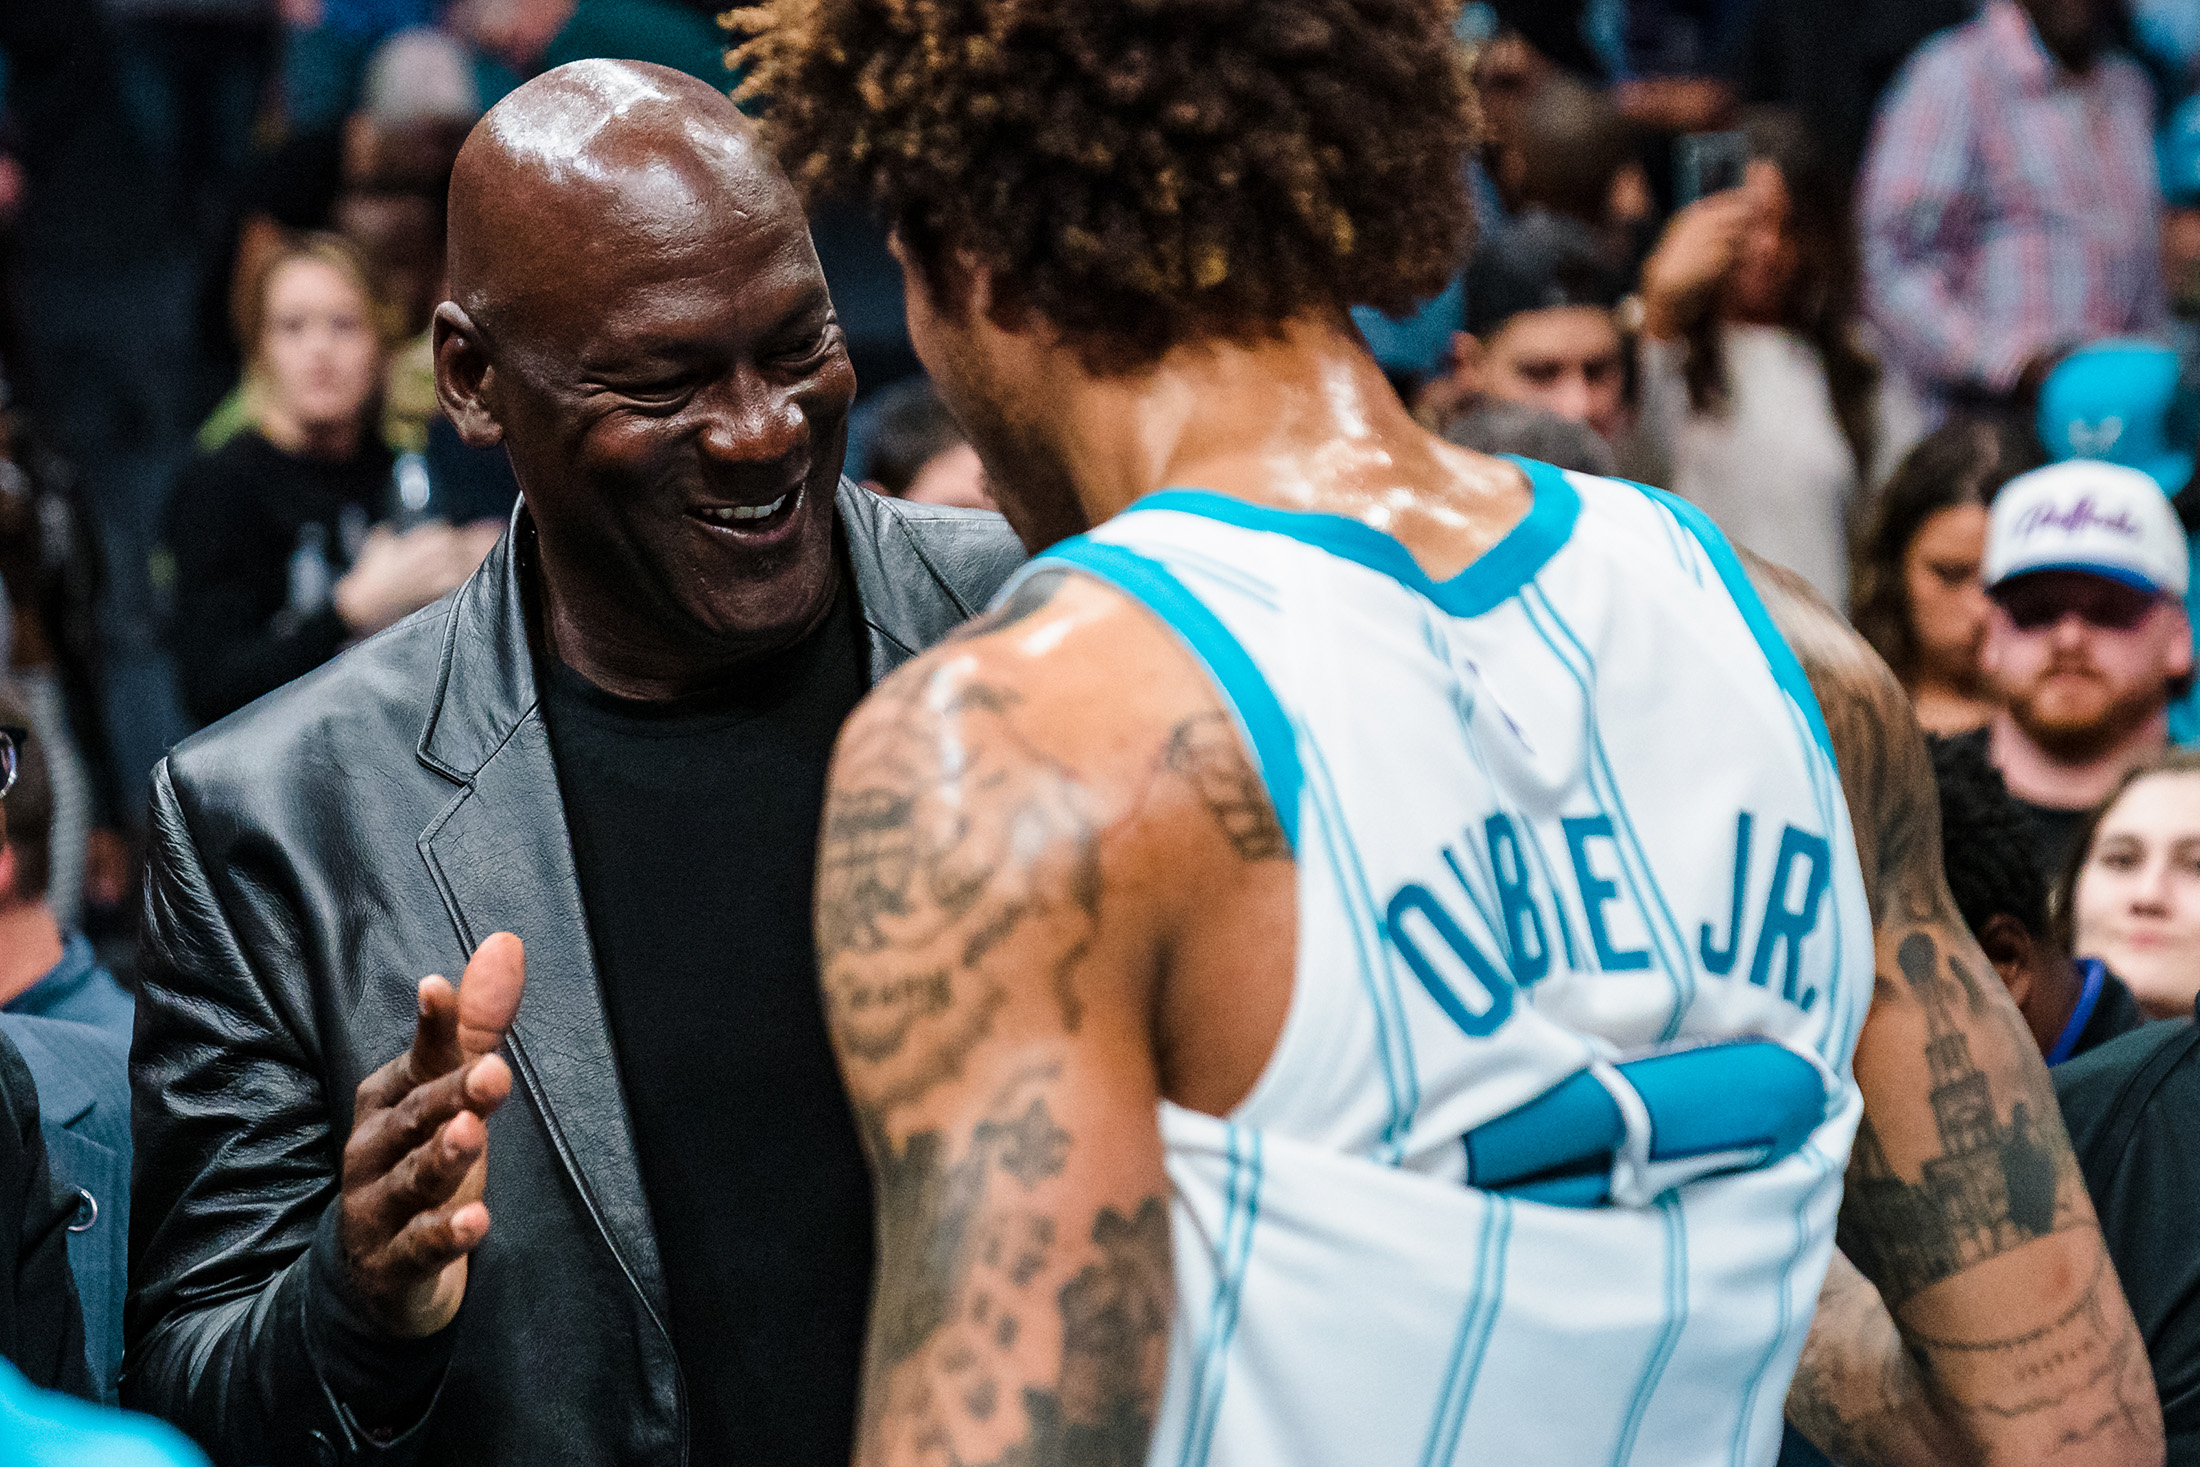 MJ Pulled Up To The Hornets Game And Looked Ready To Check In